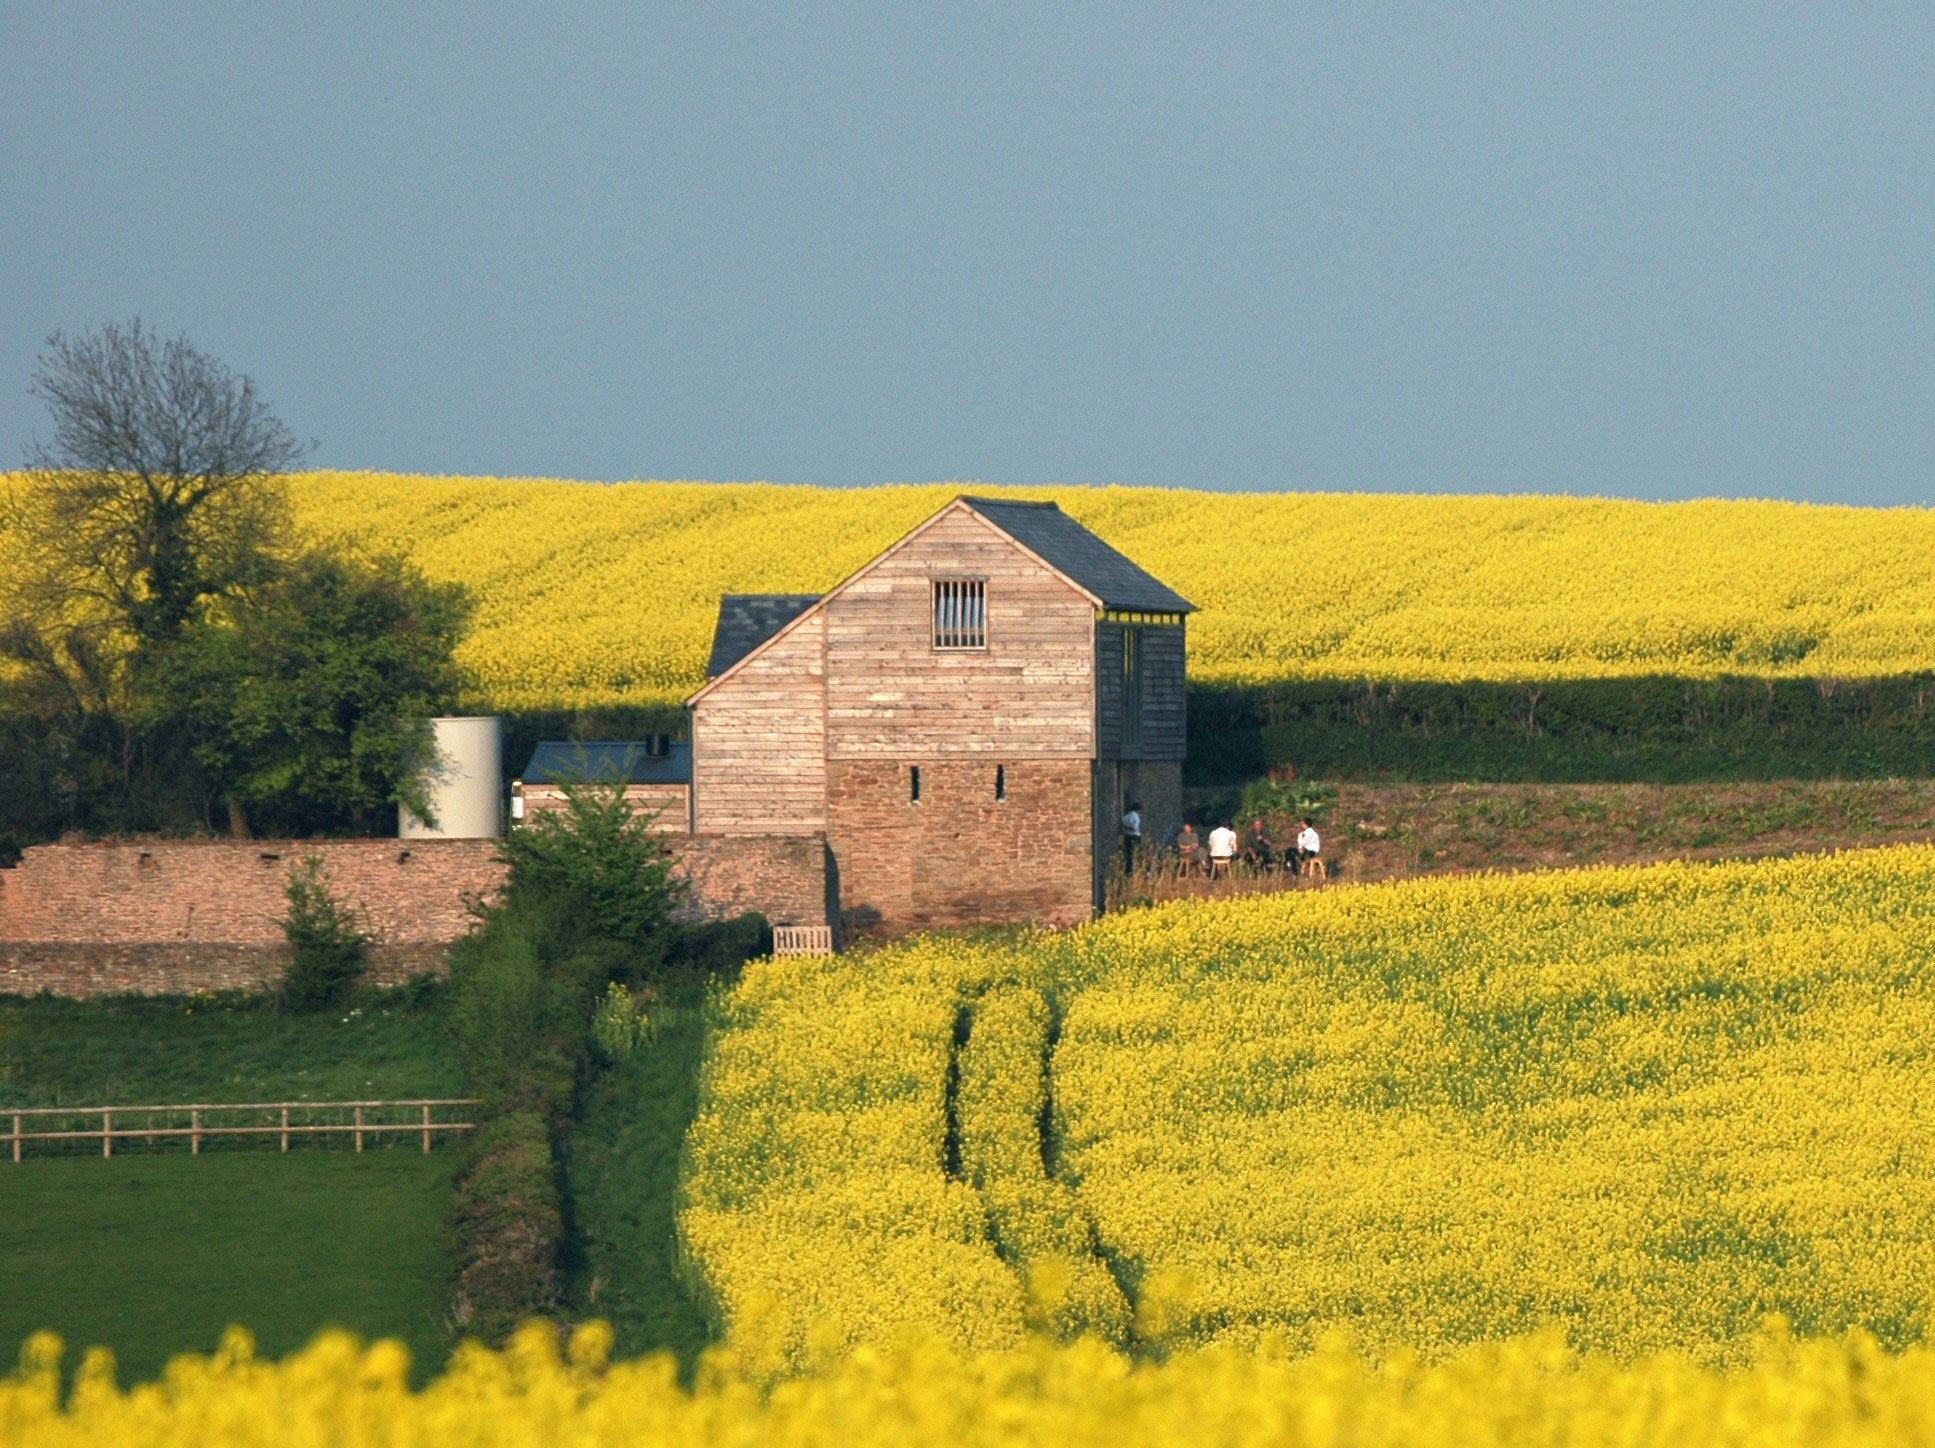 A renovated barn surrounded by golden fields of flowering rape crops